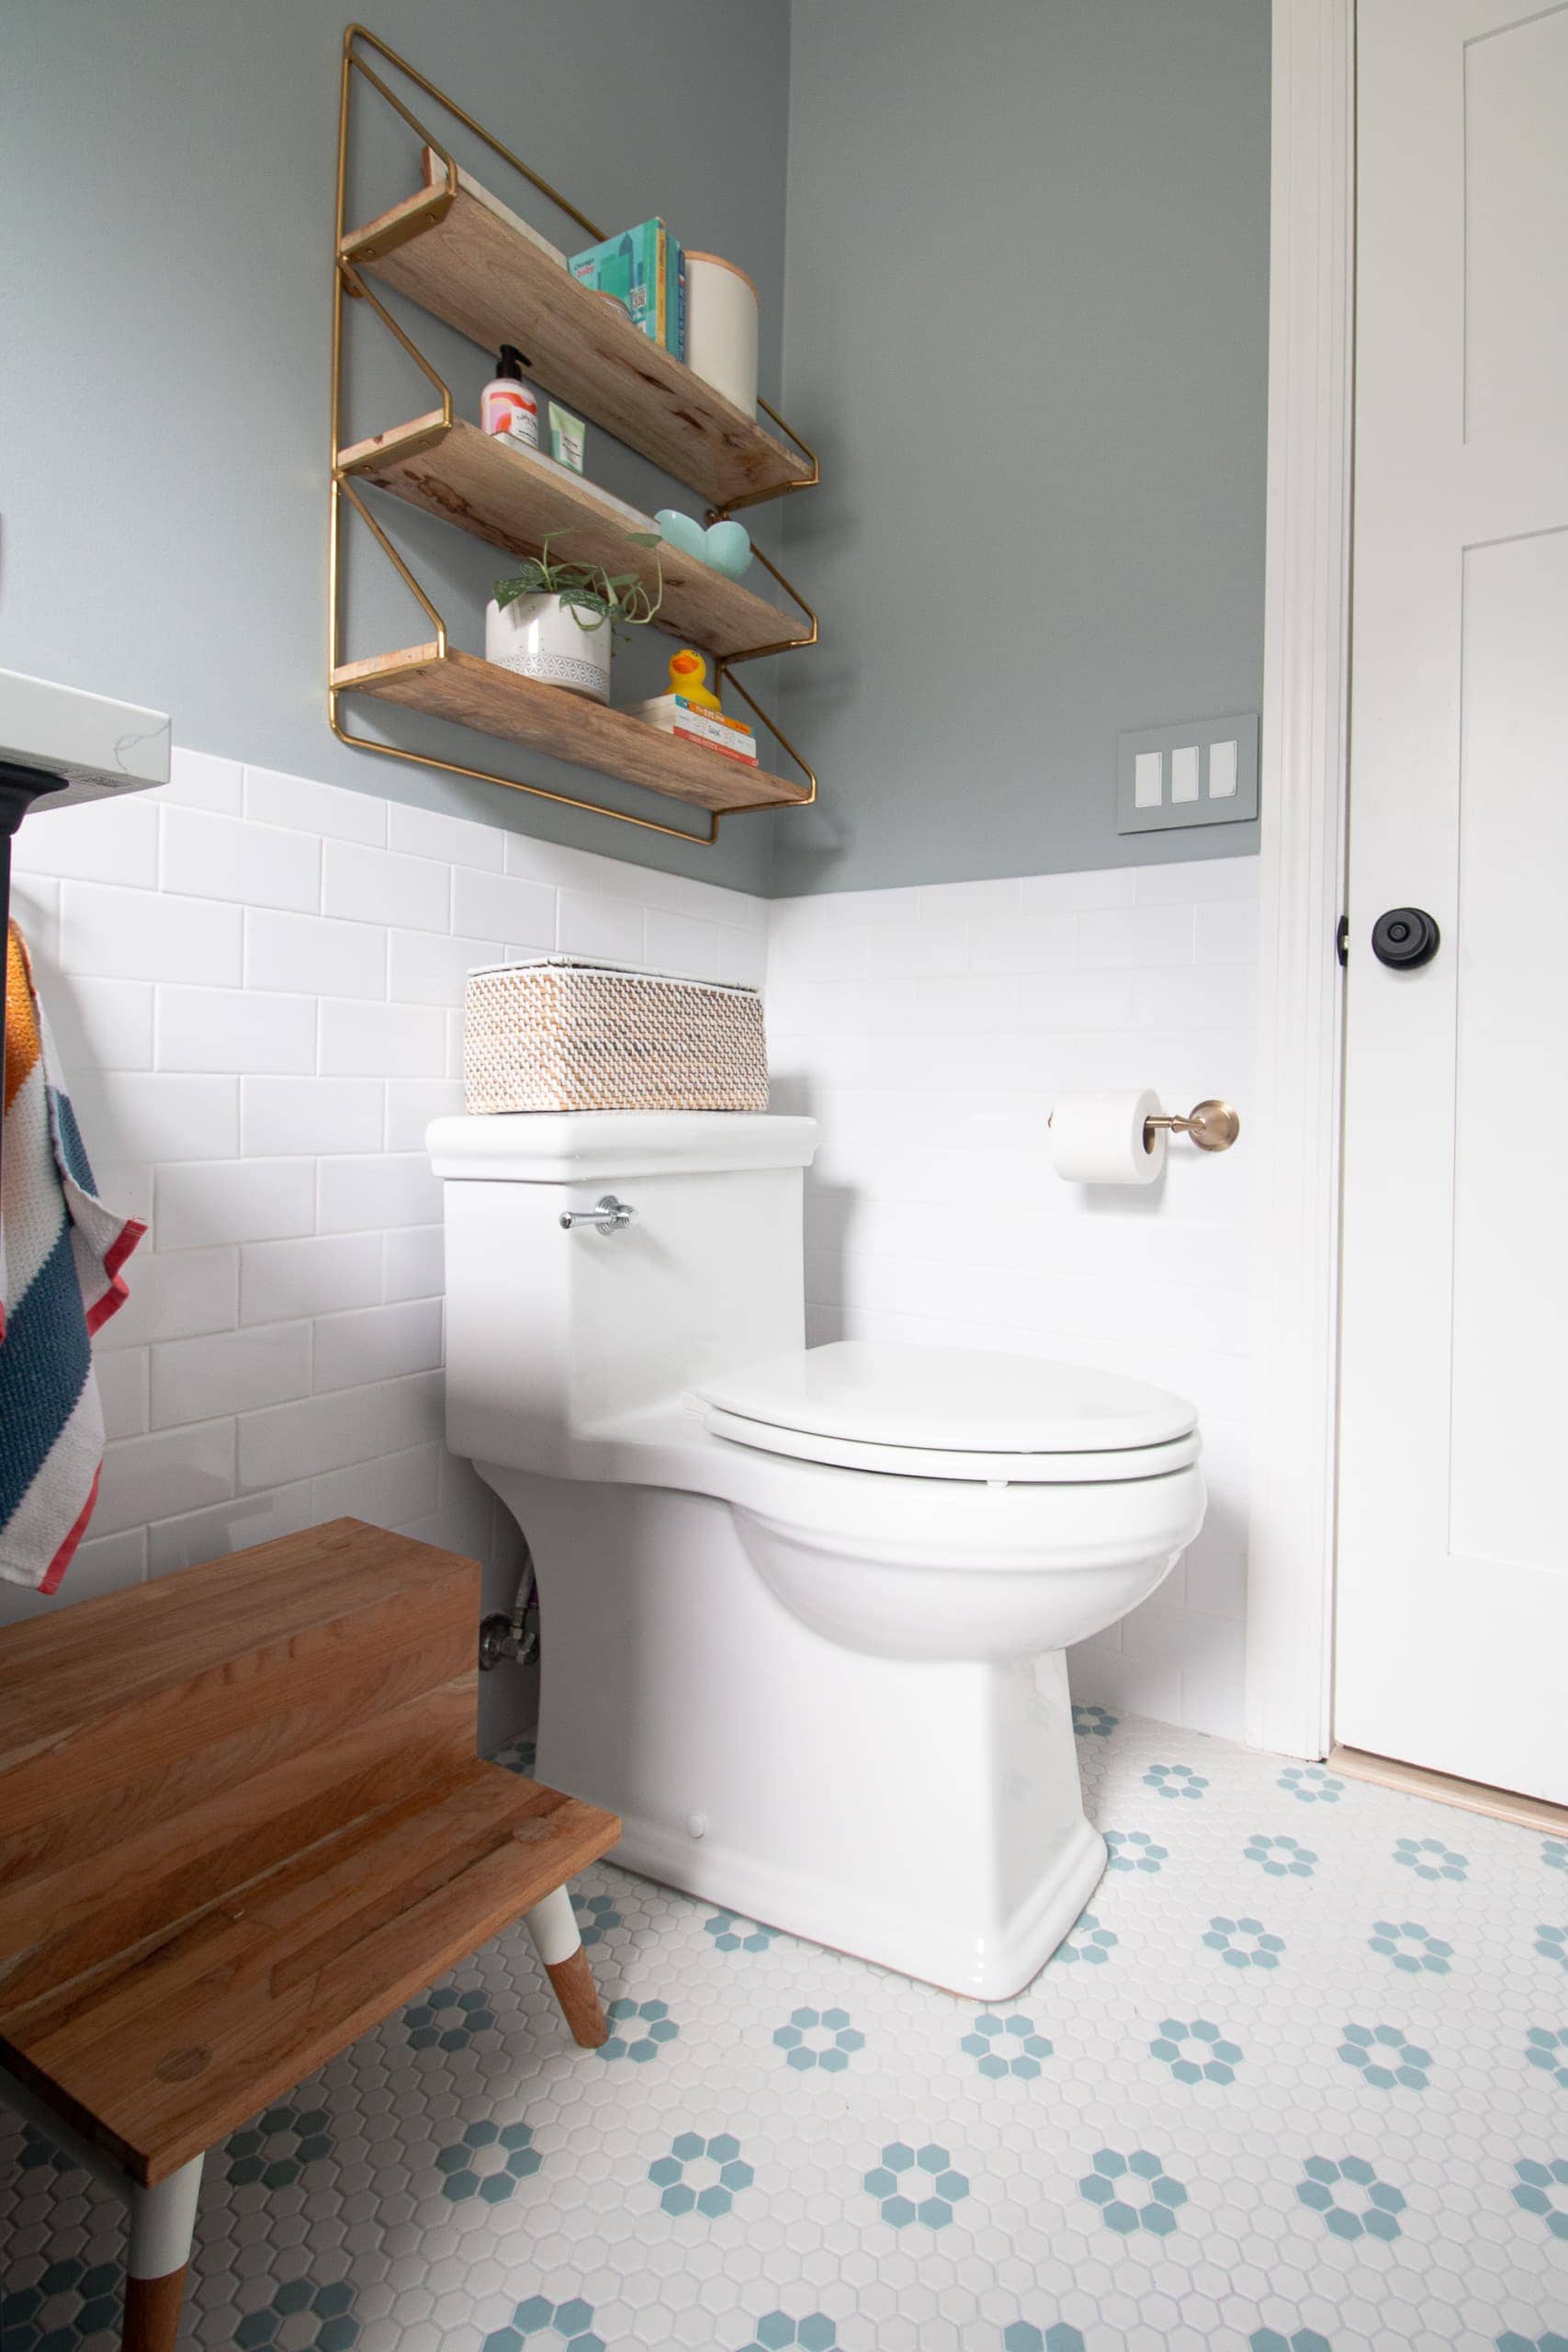 Our new skirted toilet in the kids bathroom reveal